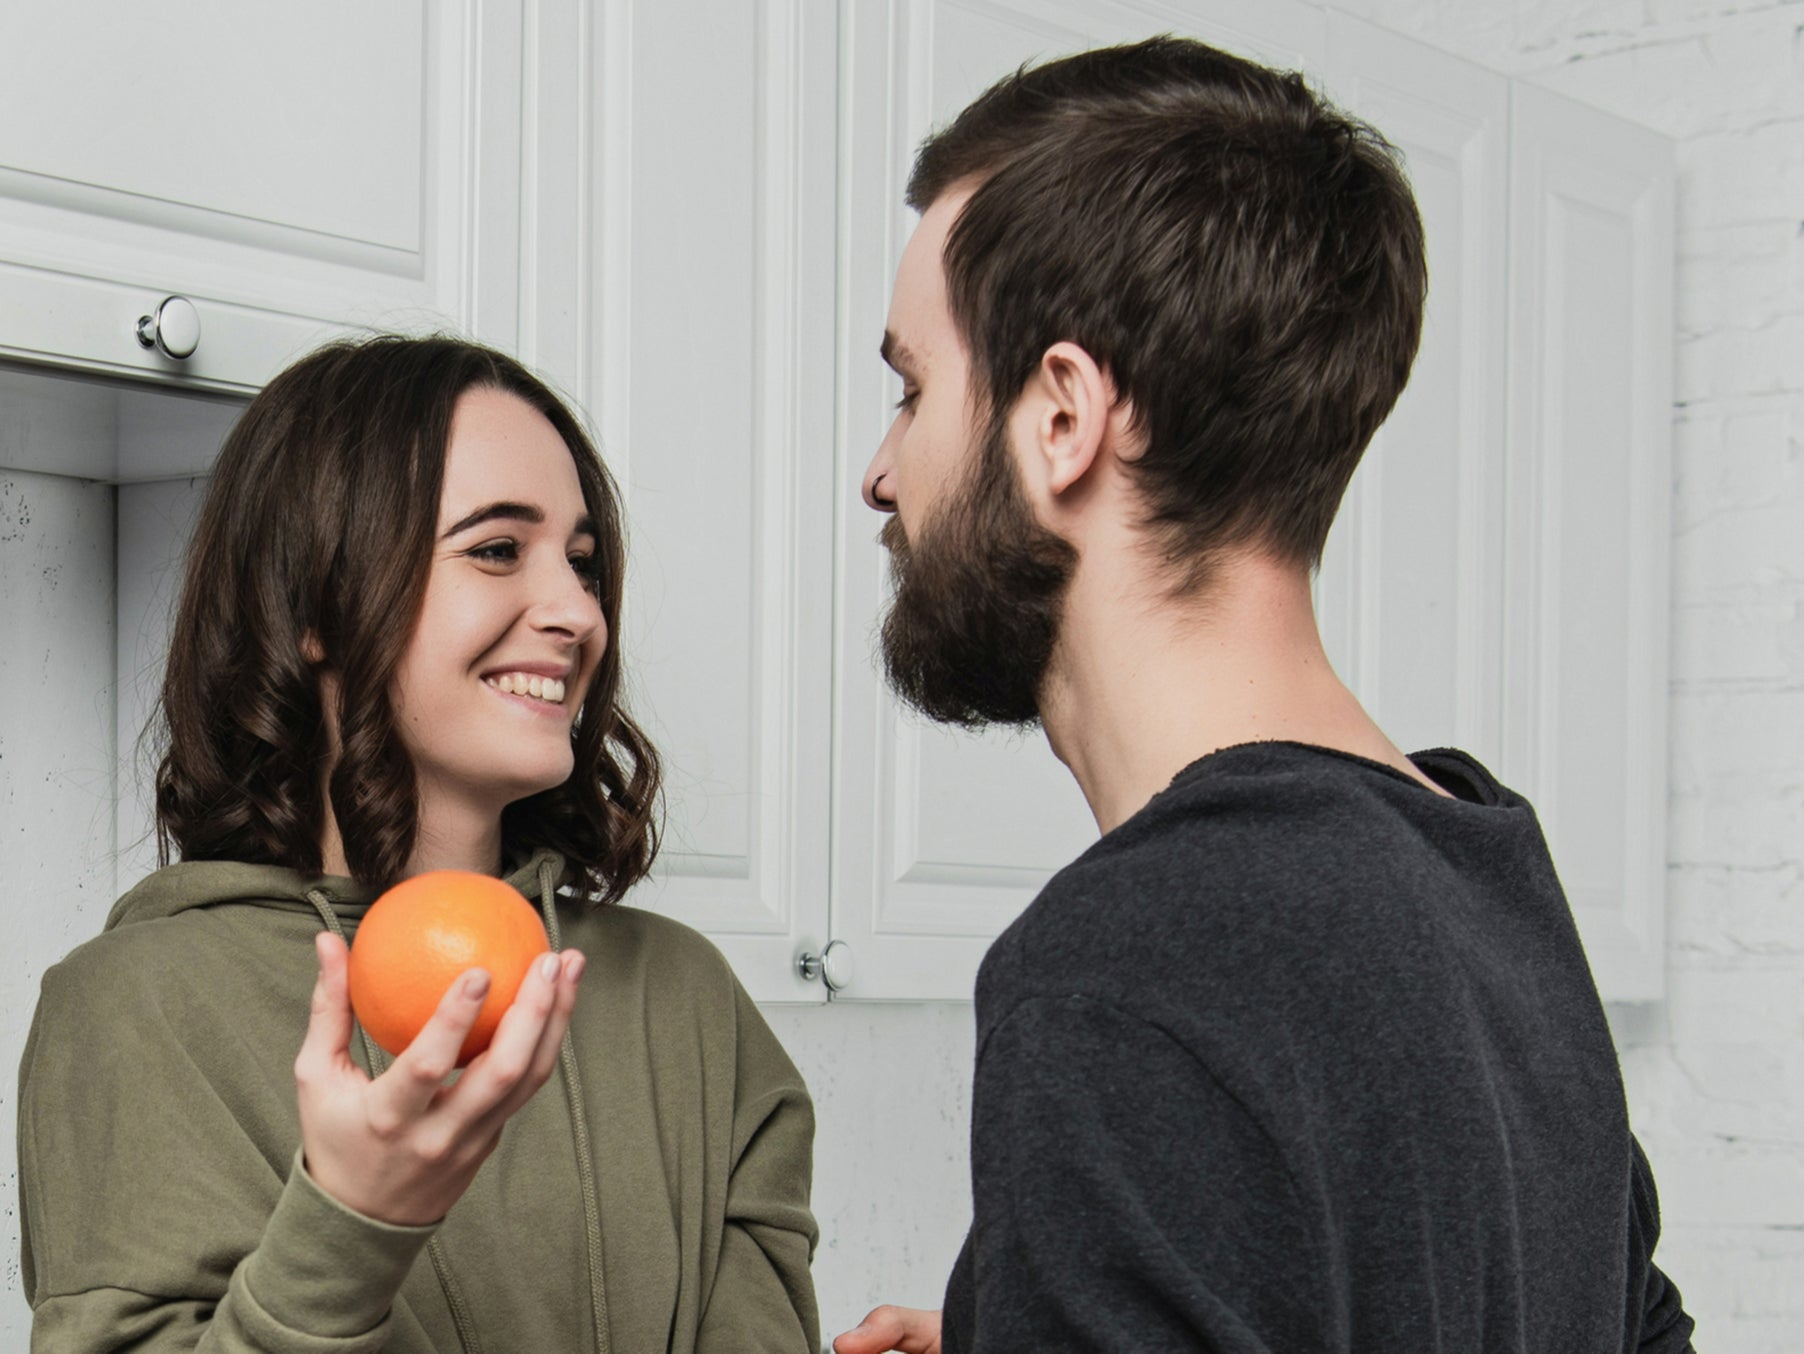 Comparing apples with oranges: could fruit hold the key to your relationship?